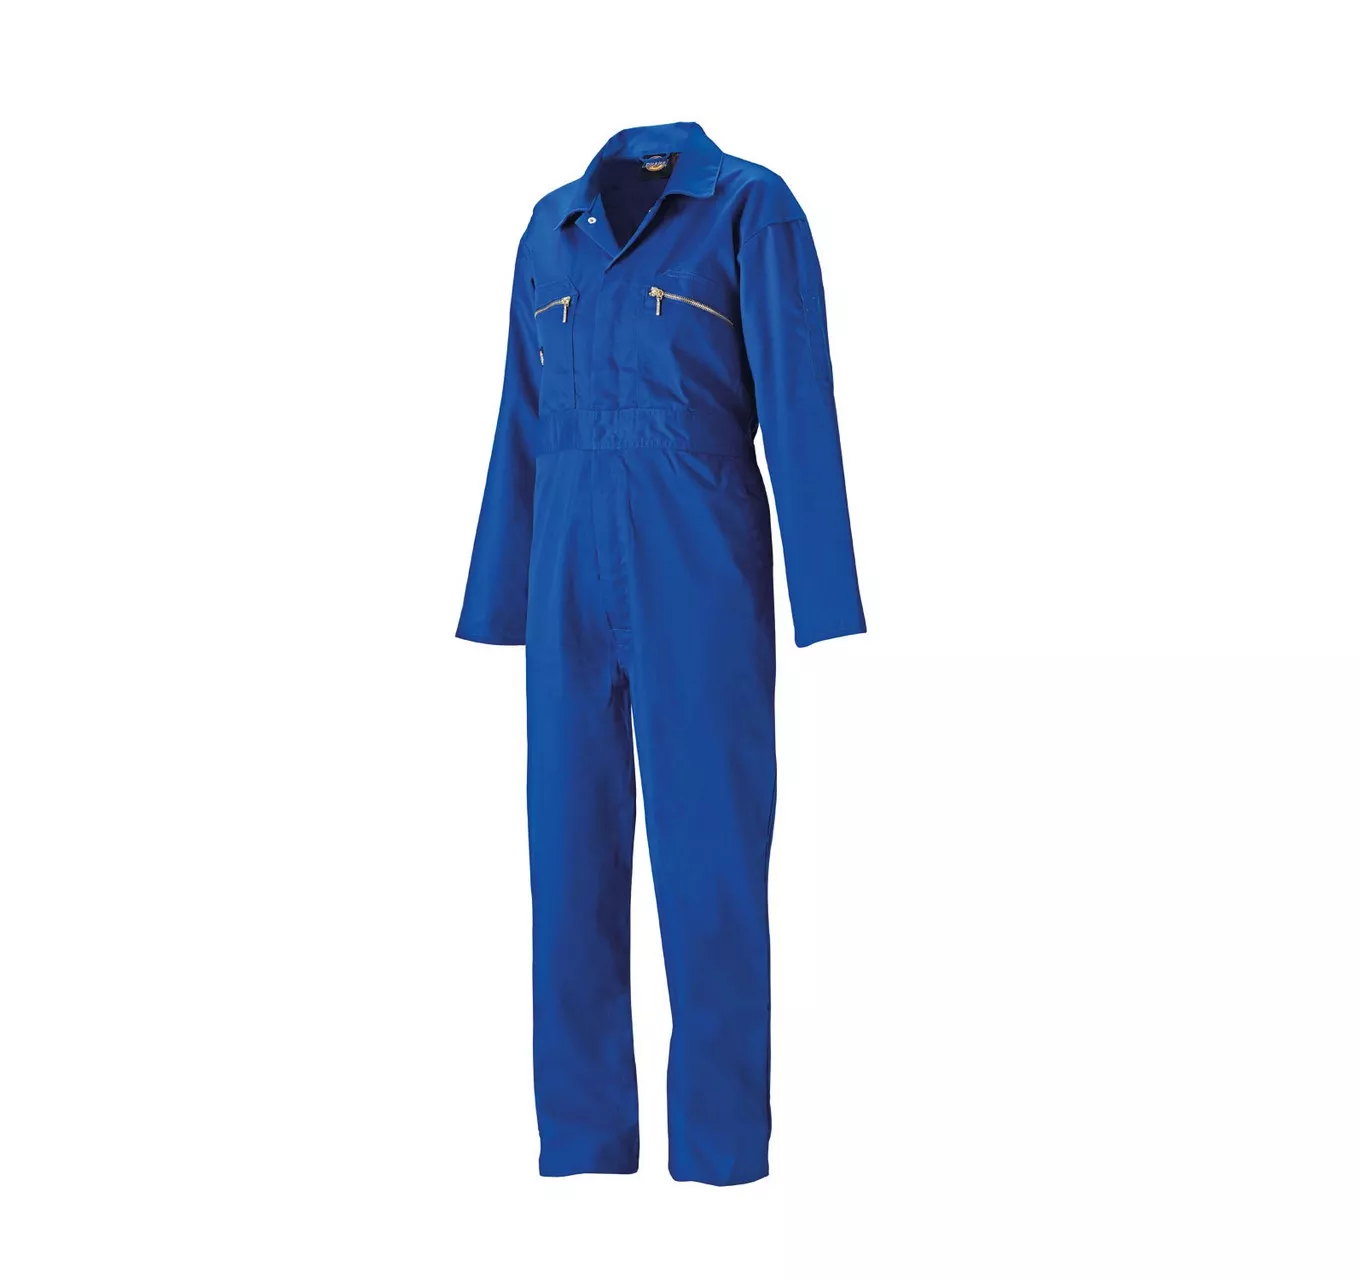 Redhawk Kids Coverall Blue 24"